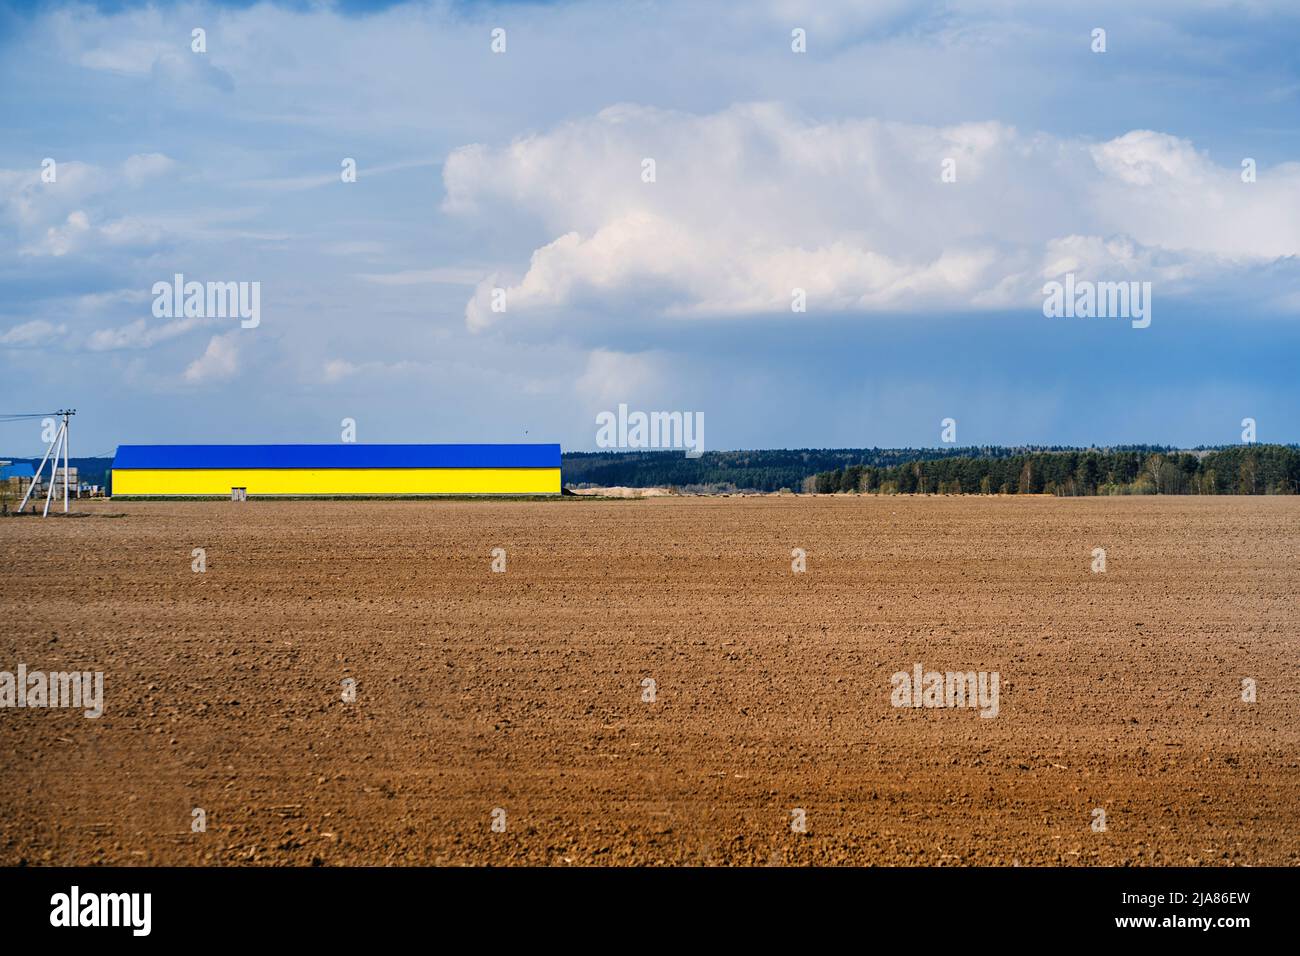 on arable land field a large hangar of yellow blue color Stock Photo